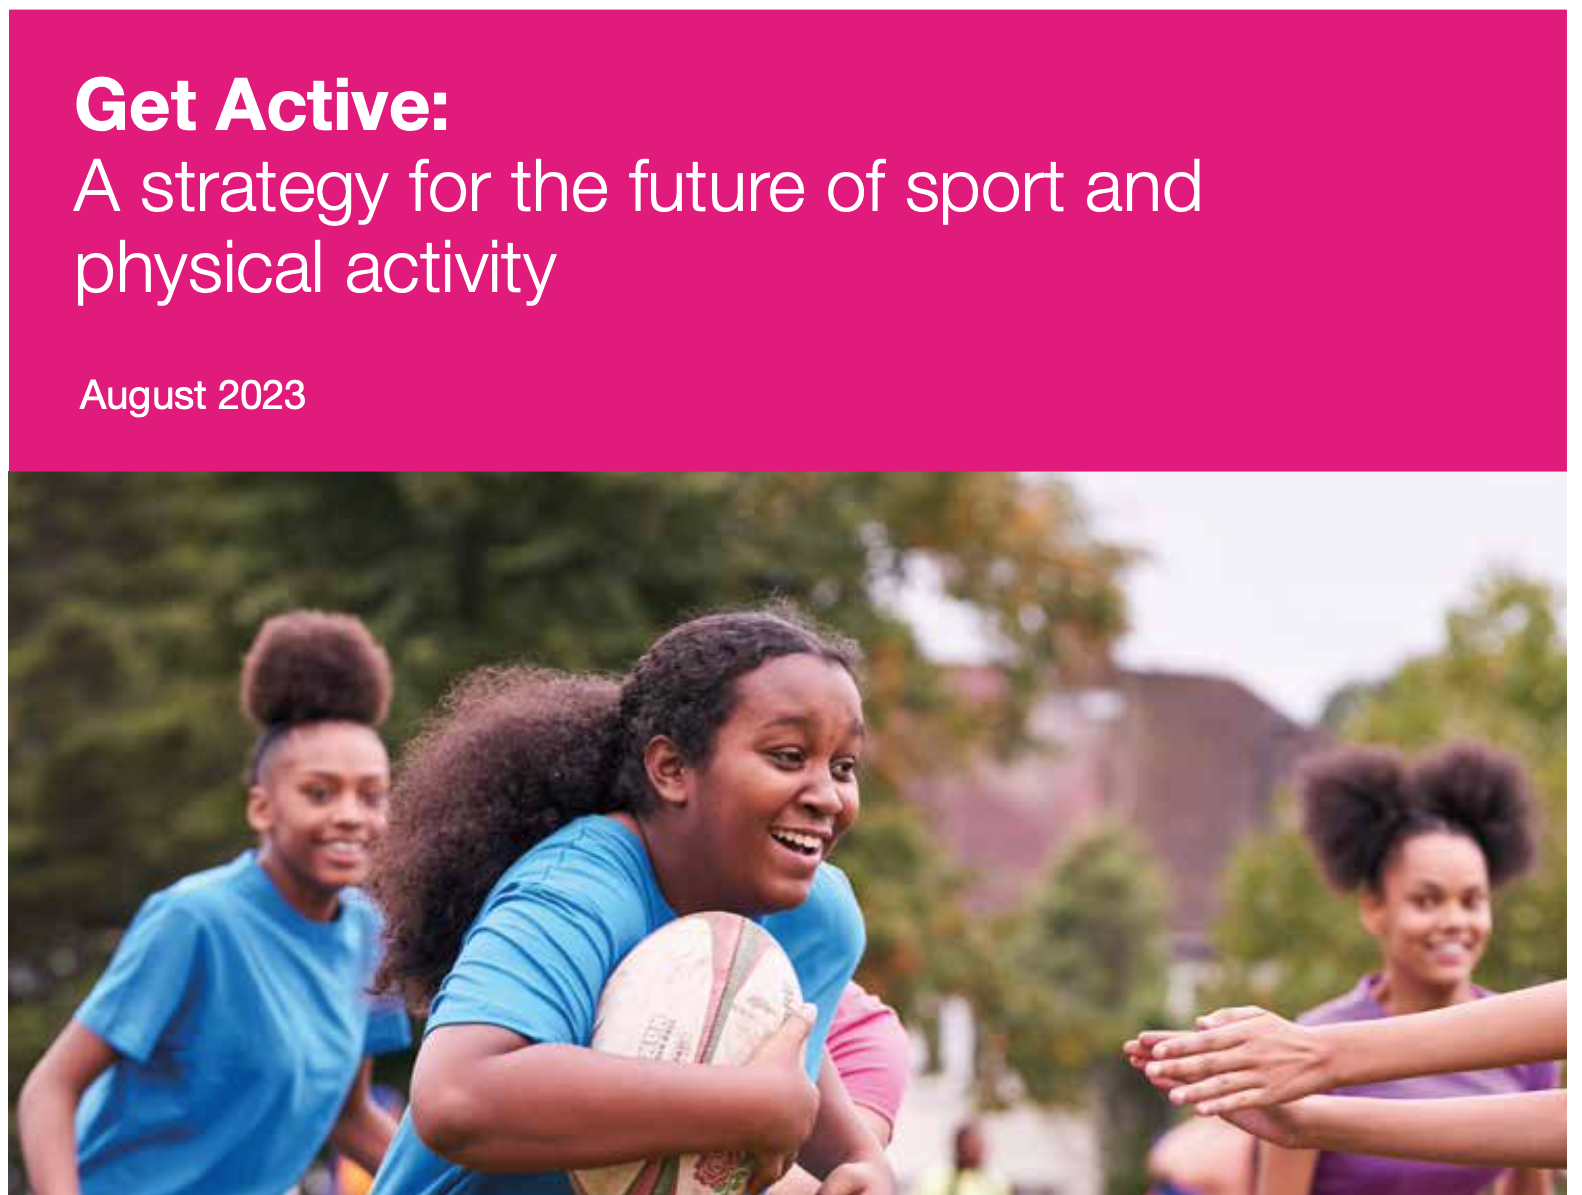 Sported responds to new UK government strategy for sport and physical activity